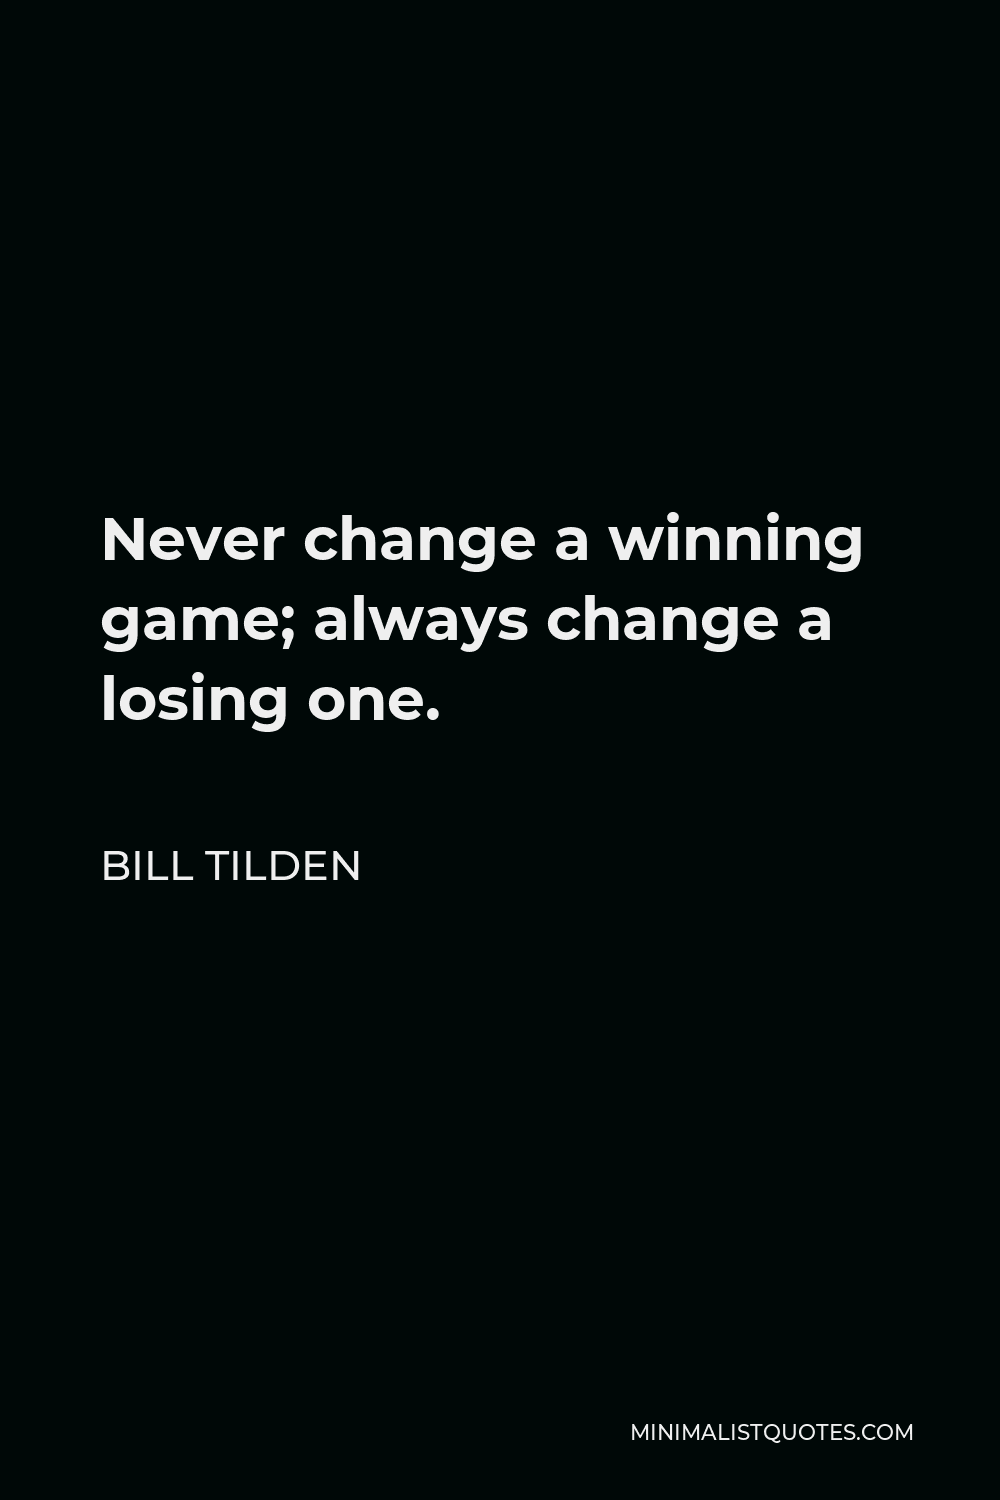 Bill Tilden Quote - Never change a winning game; always change a losing one.